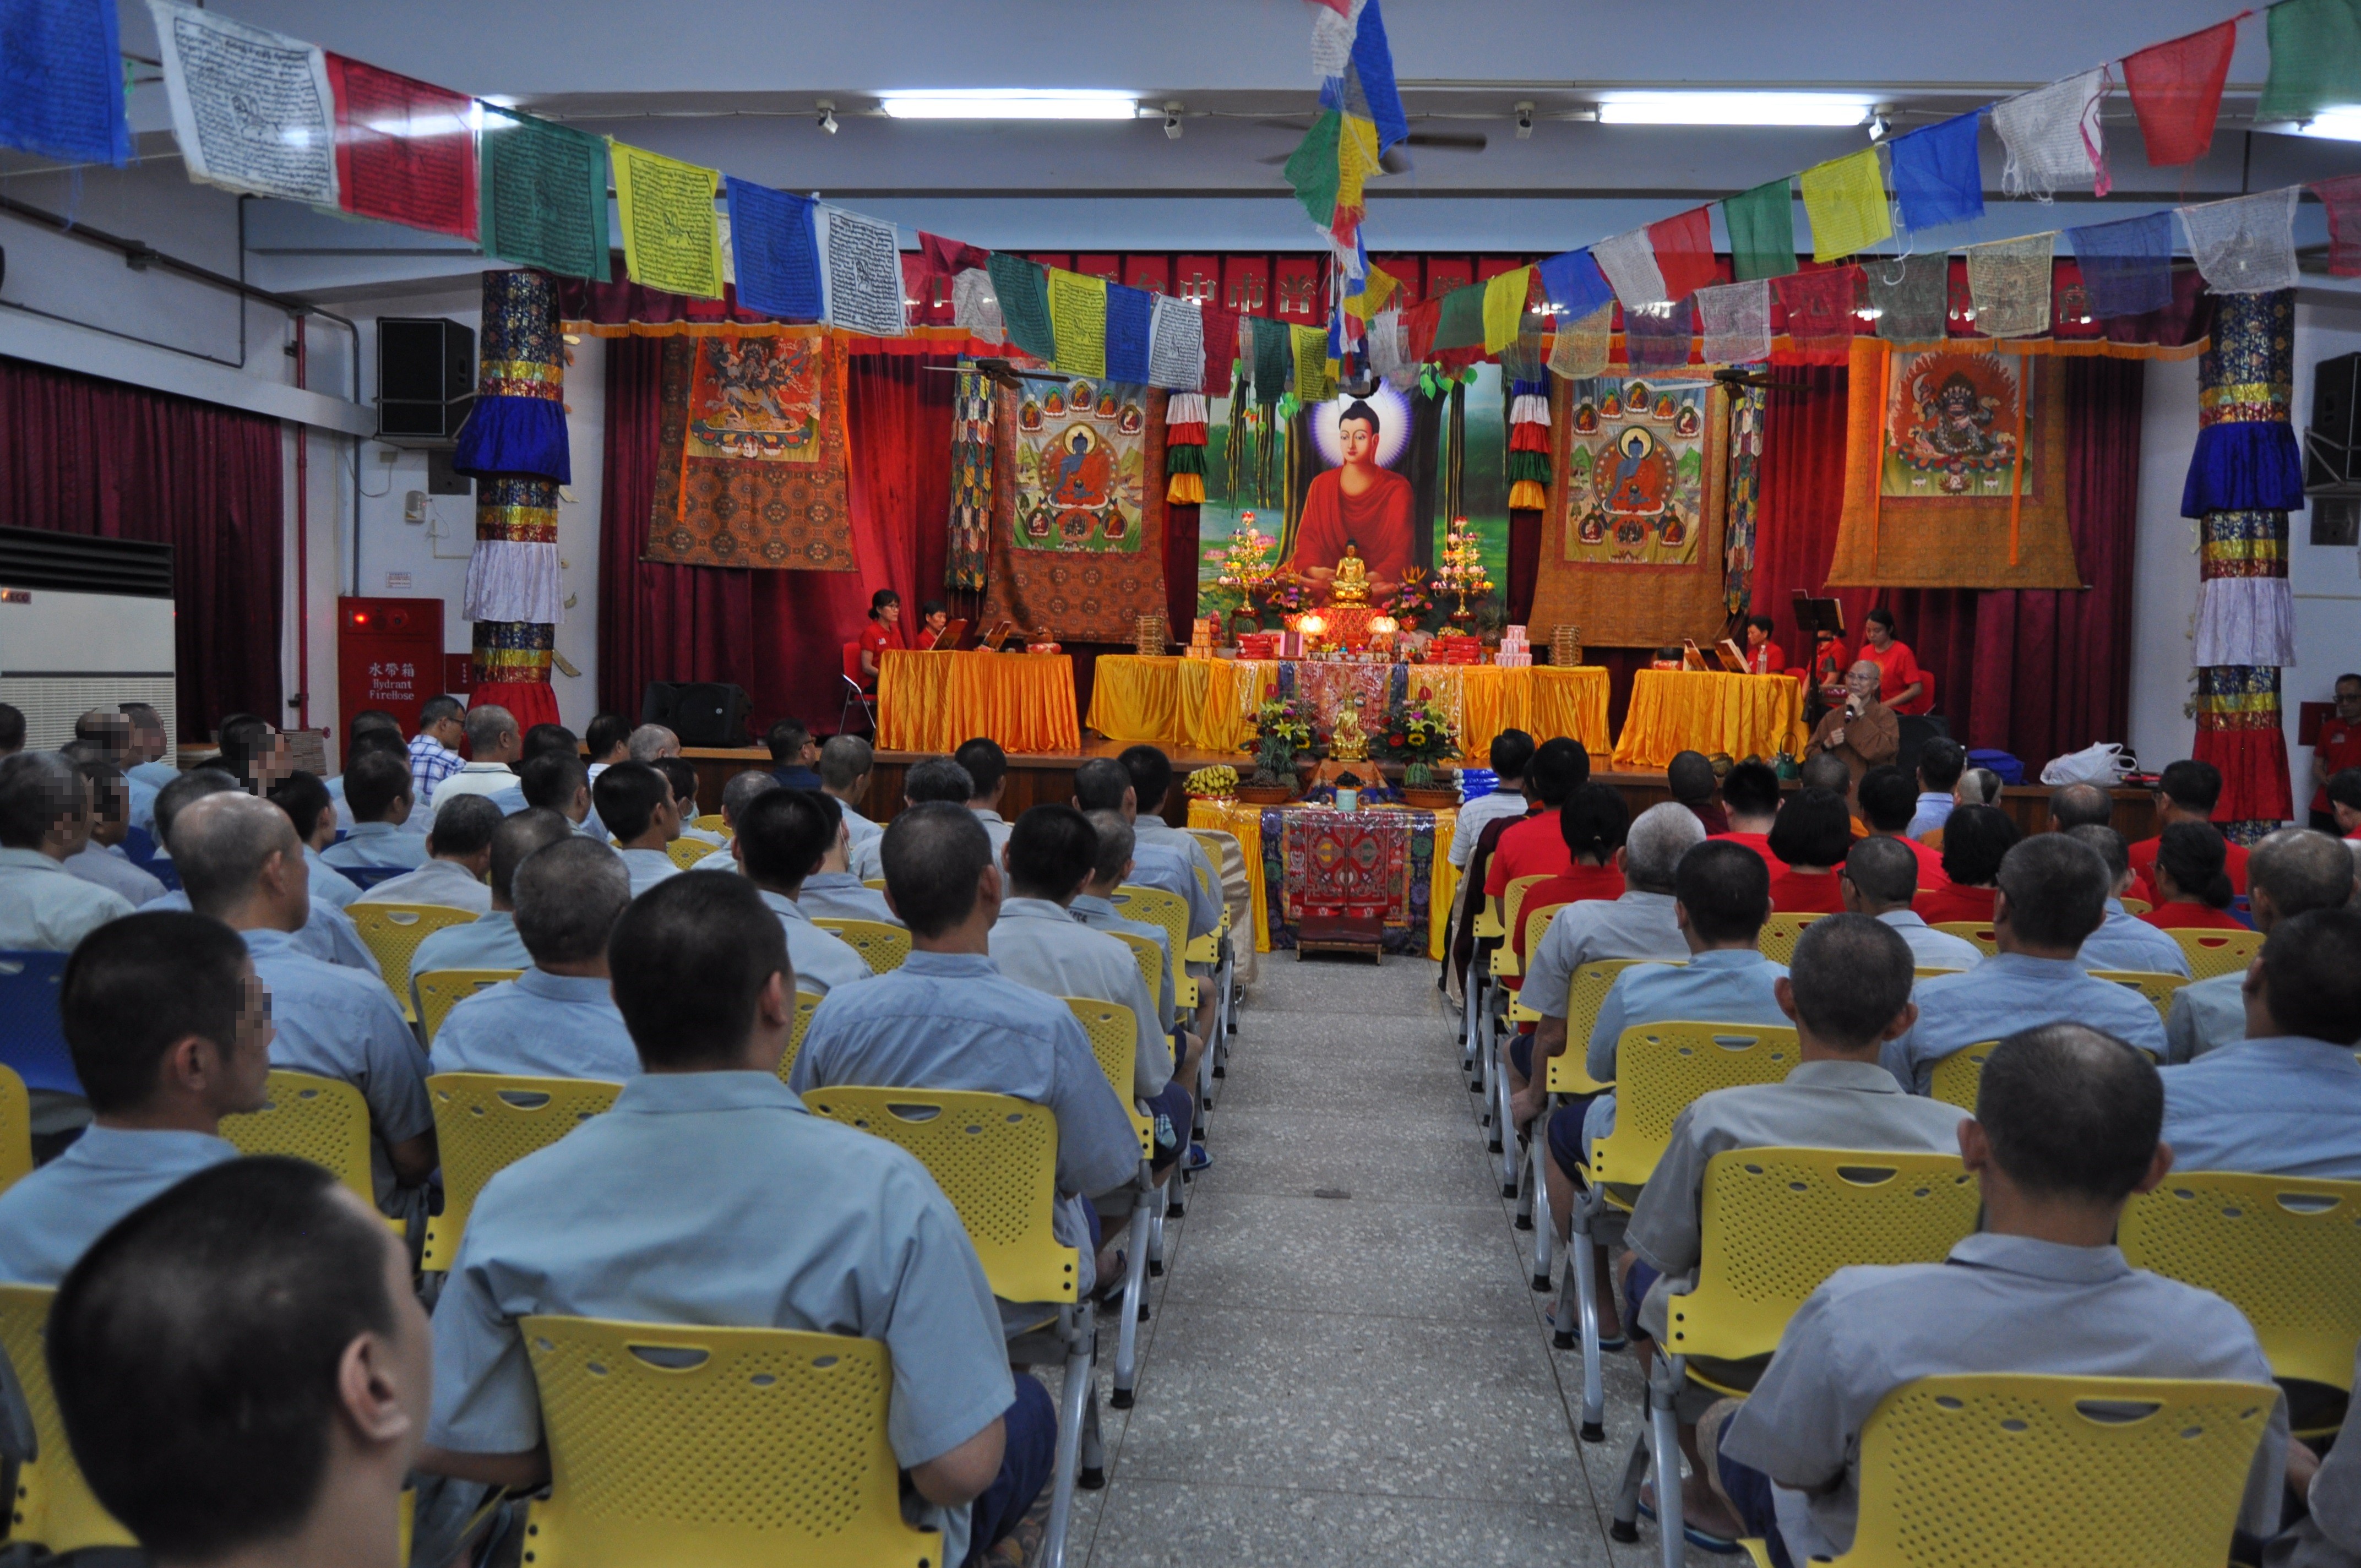 The Pu Tuceremony was held solemnly.